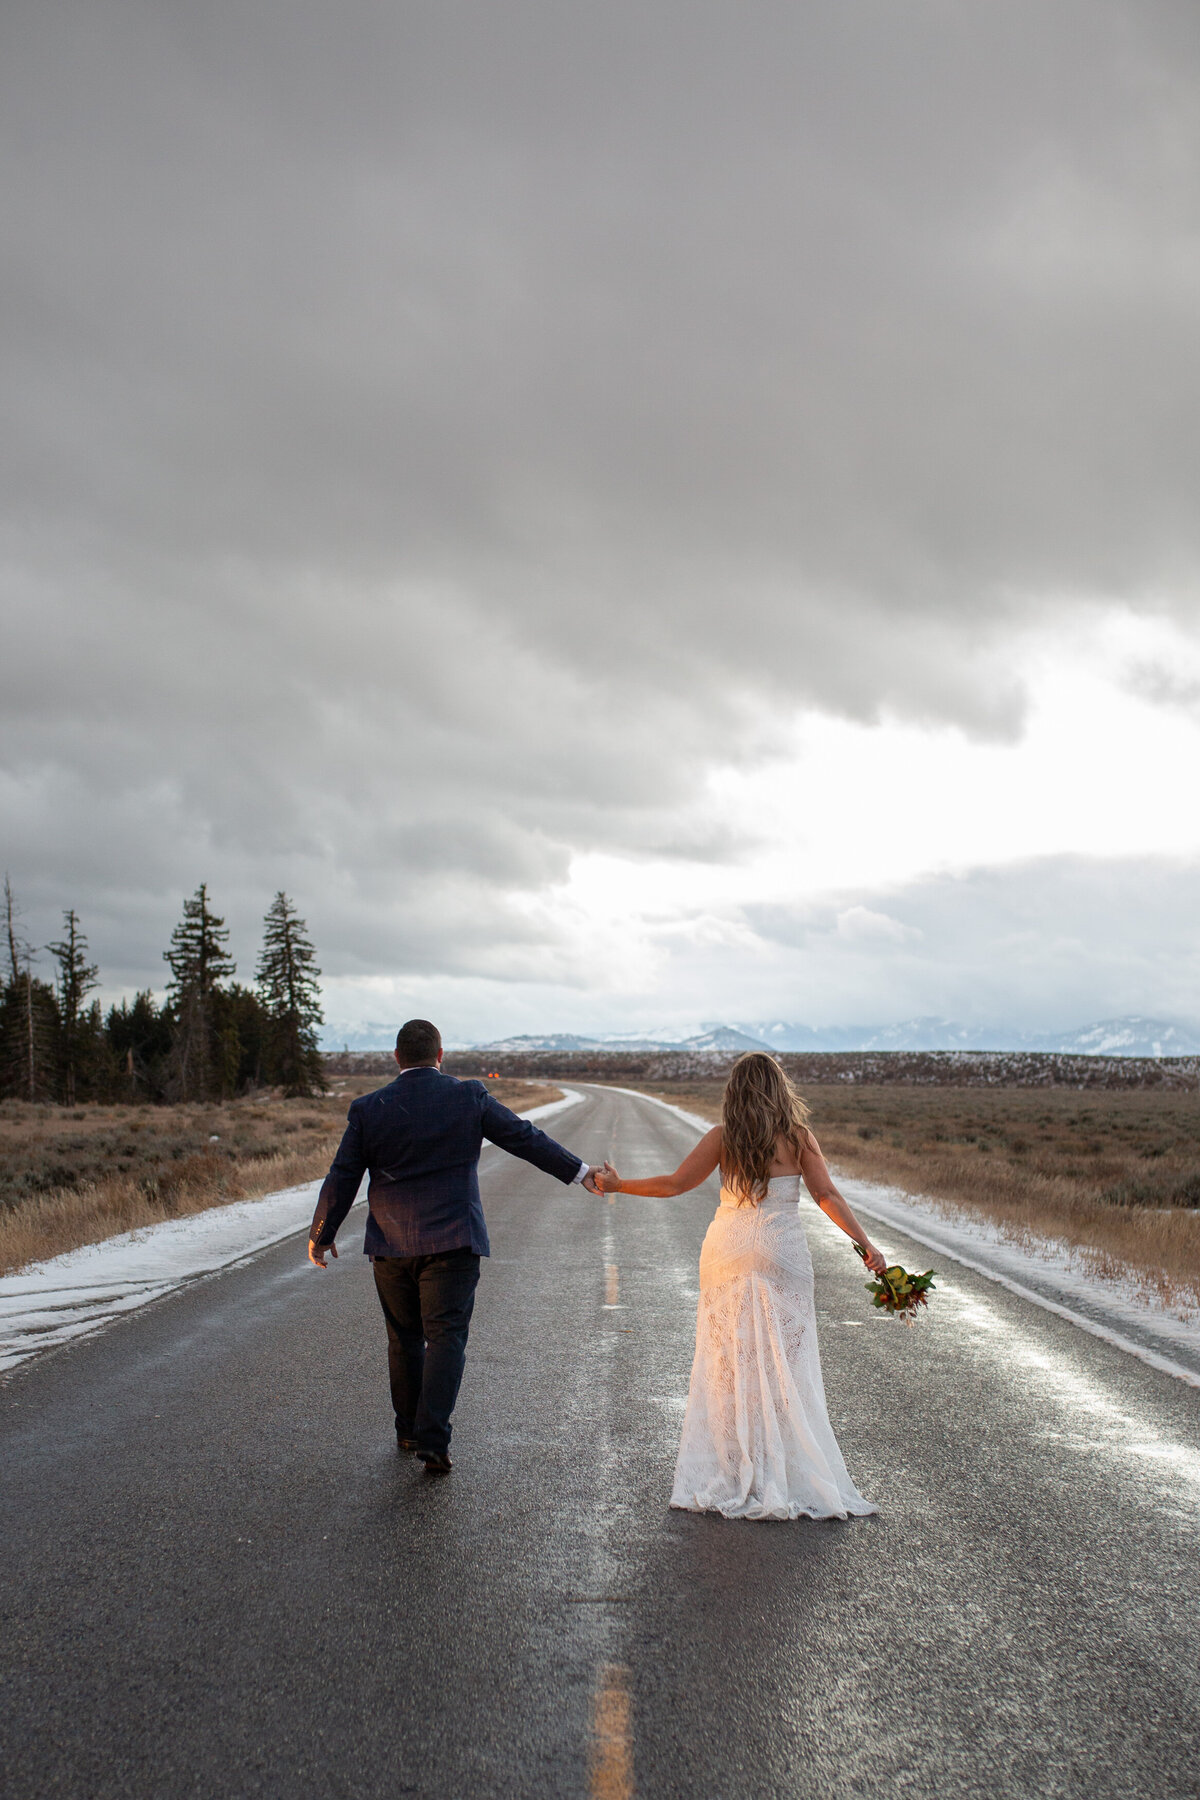 A bride and groom stroll down the road at sunset in Grand Teton National Park.